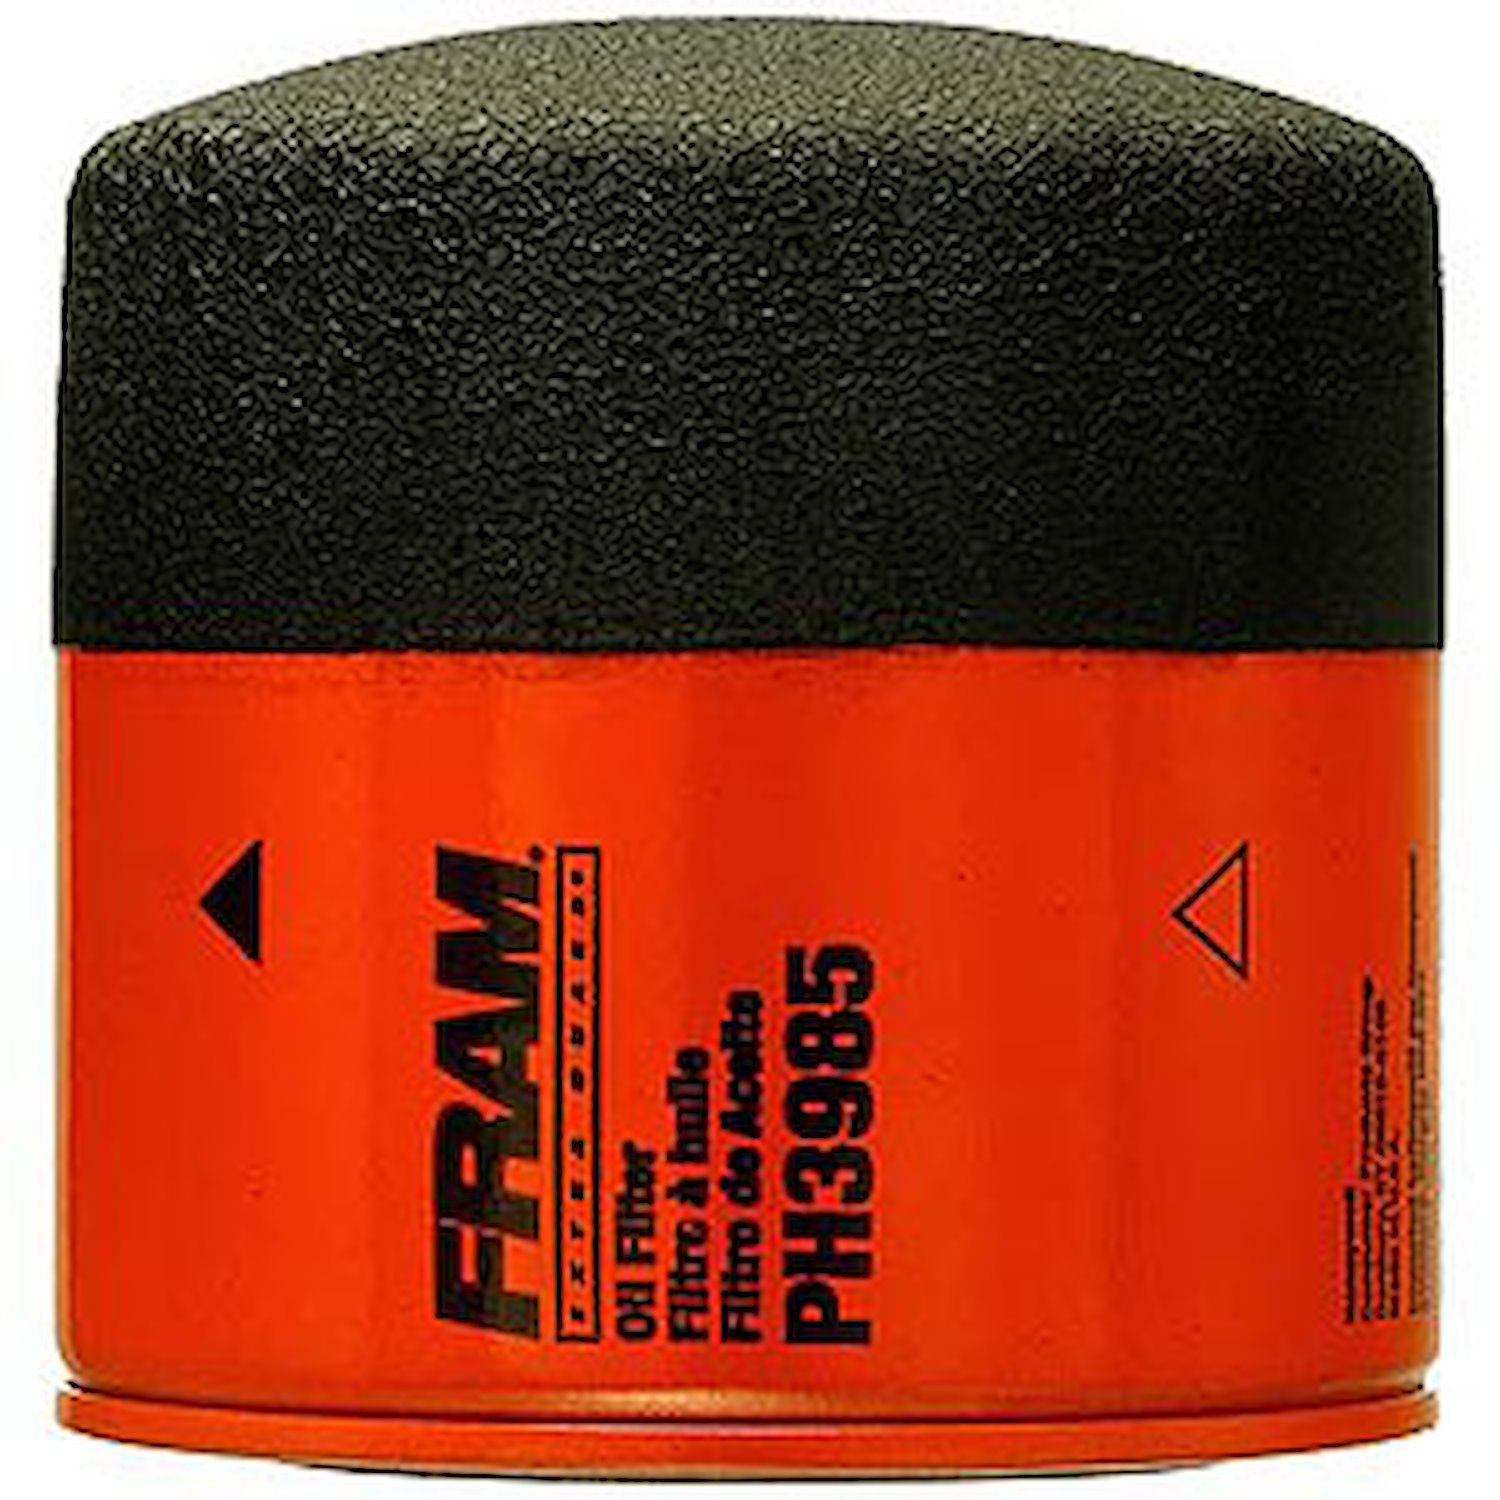 Extra Guard Oil Filter Thread Size 20mm x